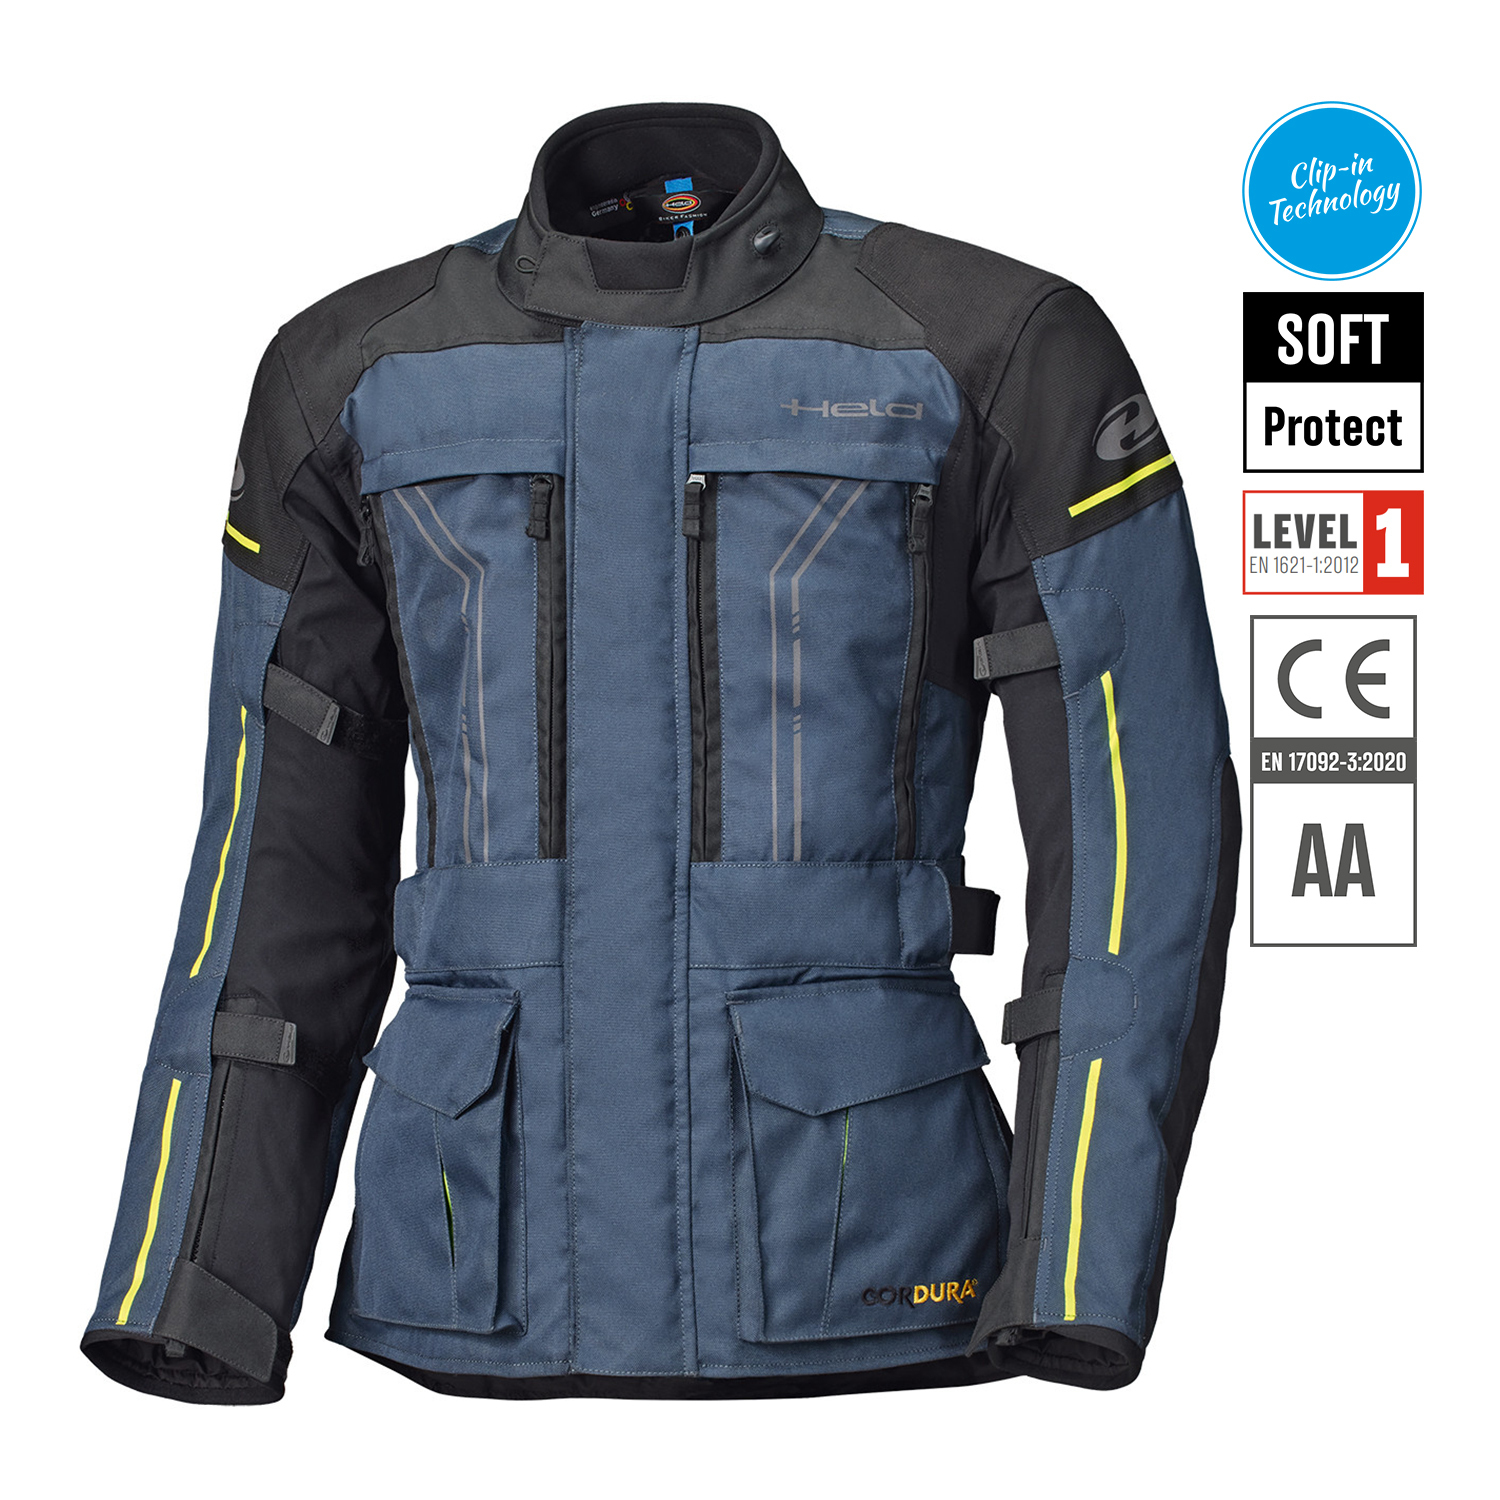 Held Pentland Jacket Navy Blue-Fluorescent Yellow - Available in Various Sizes